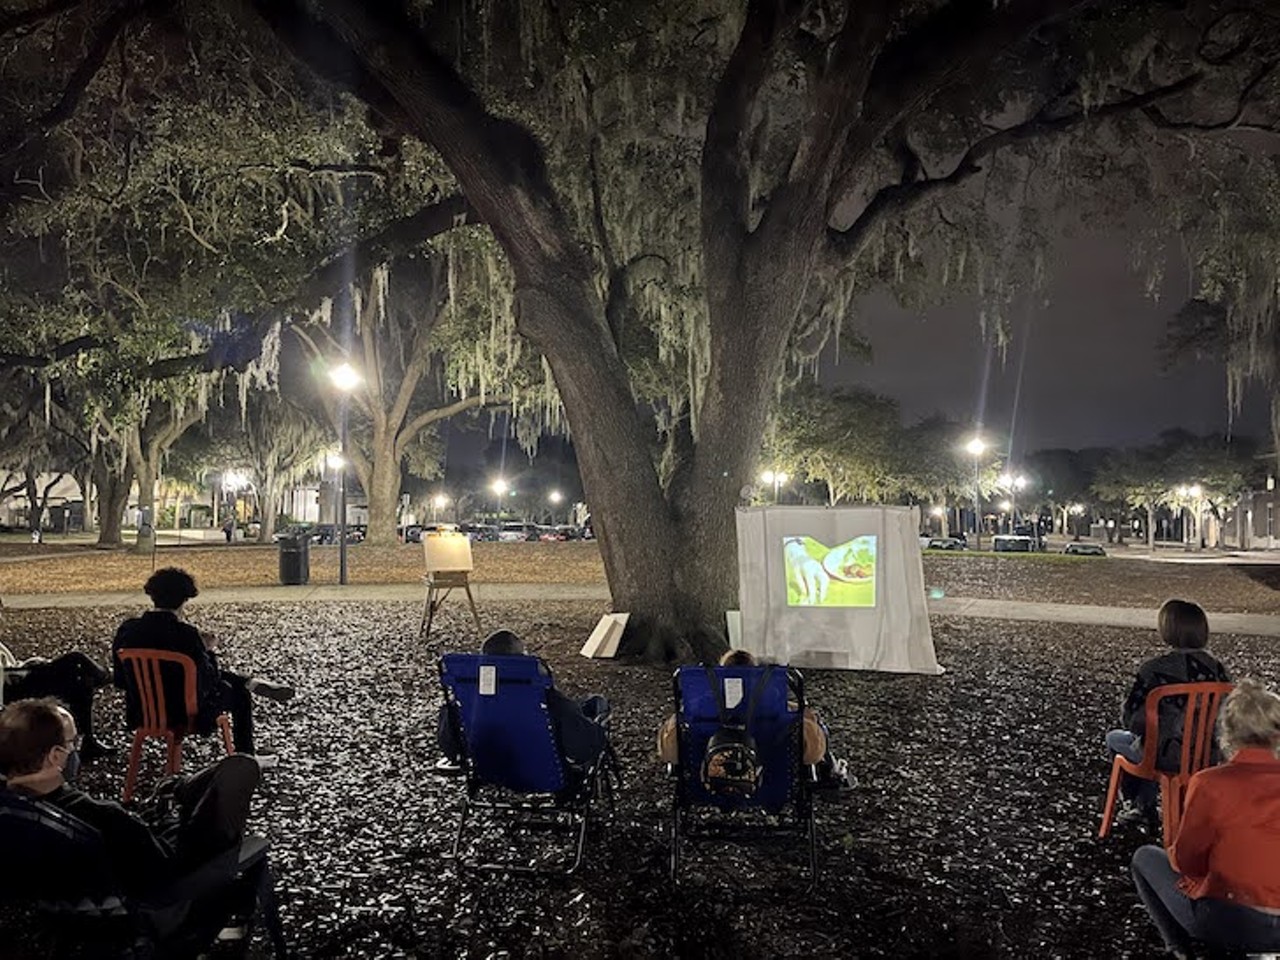 All the world &#151; or at least Loch Haven Park &#151; is a stage for the Orlando Fringe Winter Mini-Fest